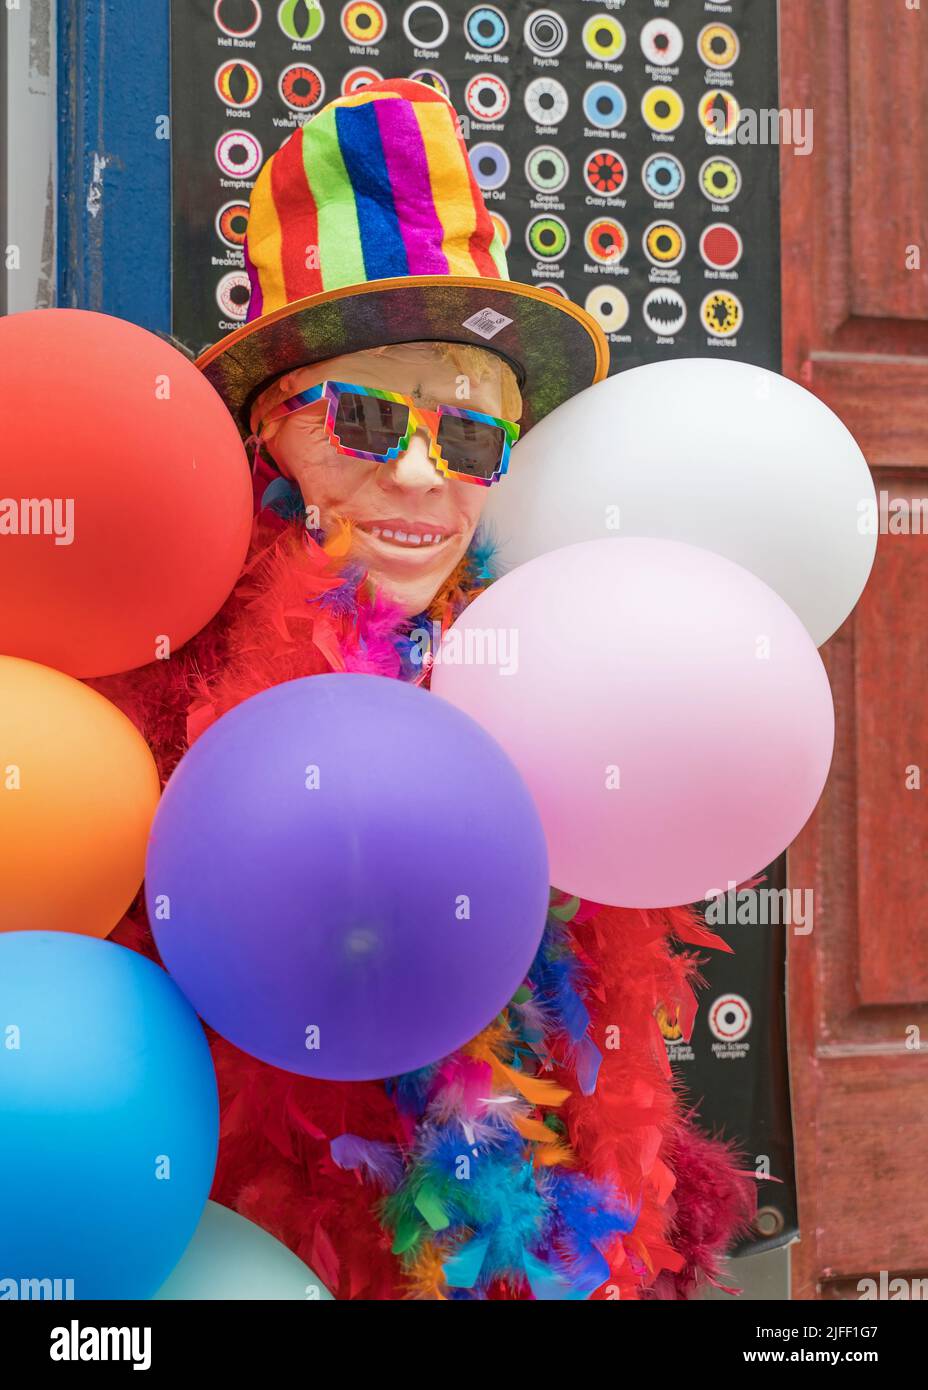 Fancy dress shop decorated with bright coloured flags and decorations. London Stock Photo